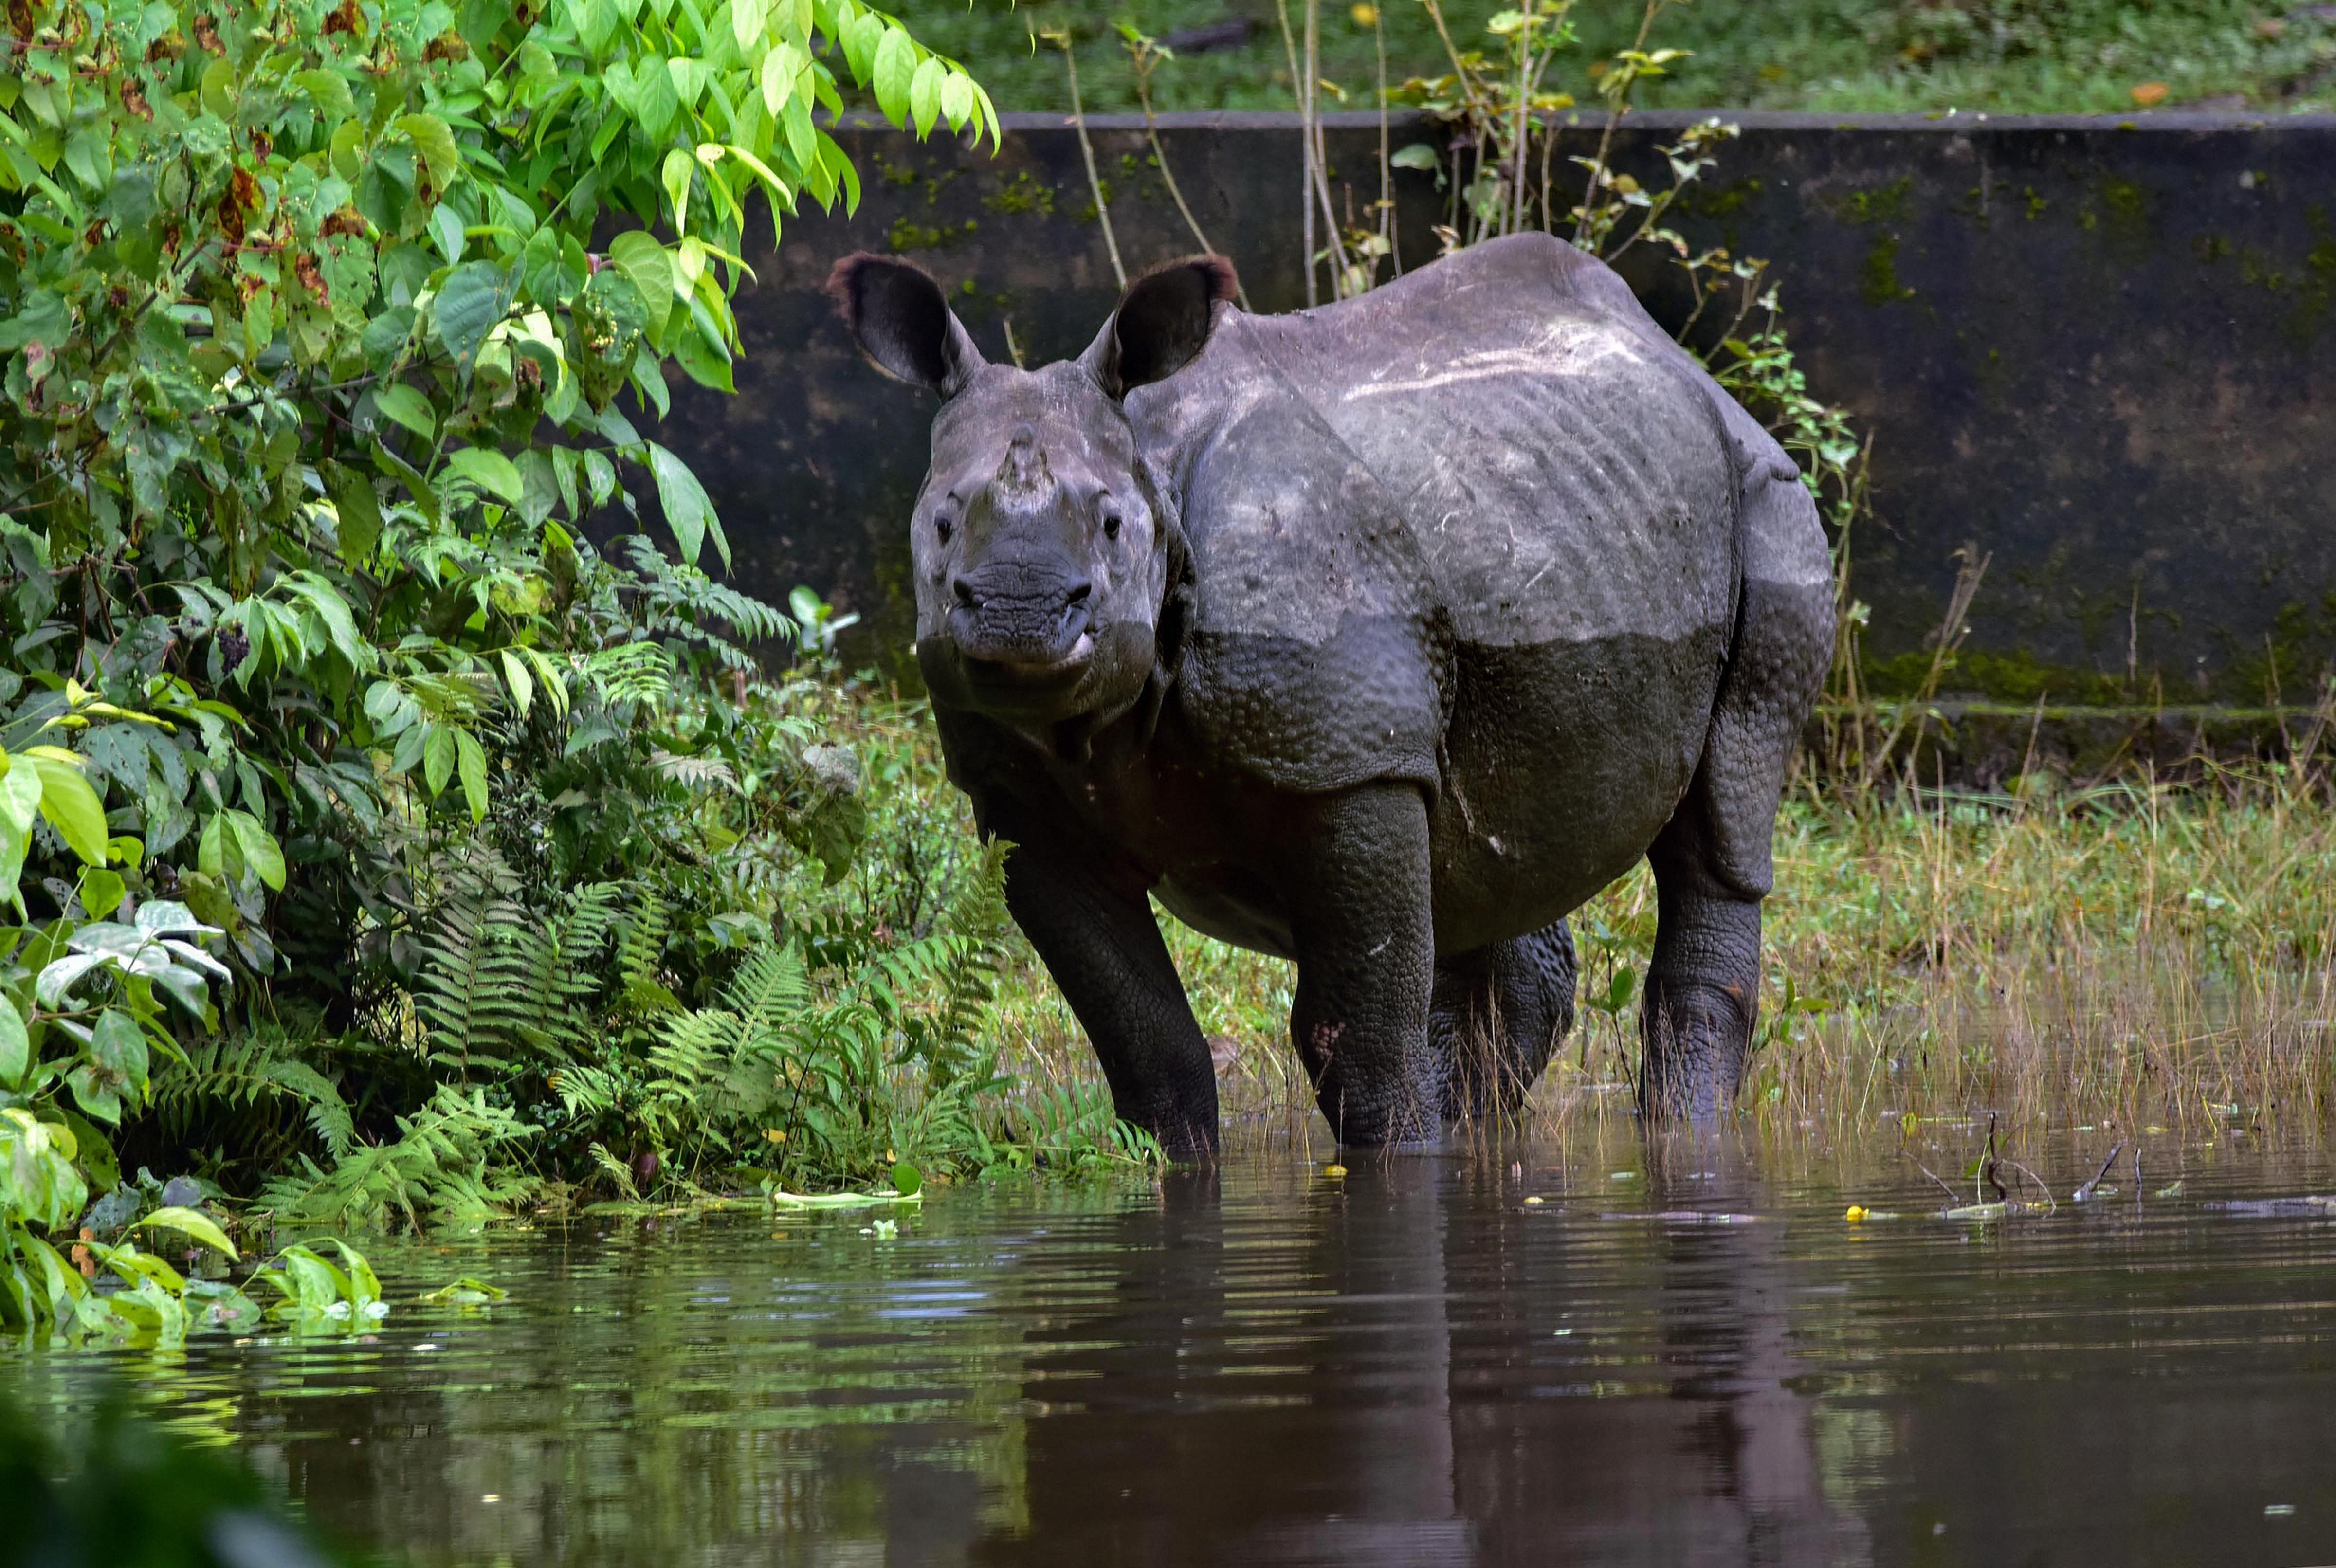 A rhino takes shelter at a higher land in the flood-hit Kaziranga National Park in Nagaon district of Assam, Thursday, July 16, 2020. Credit: PTI Photo